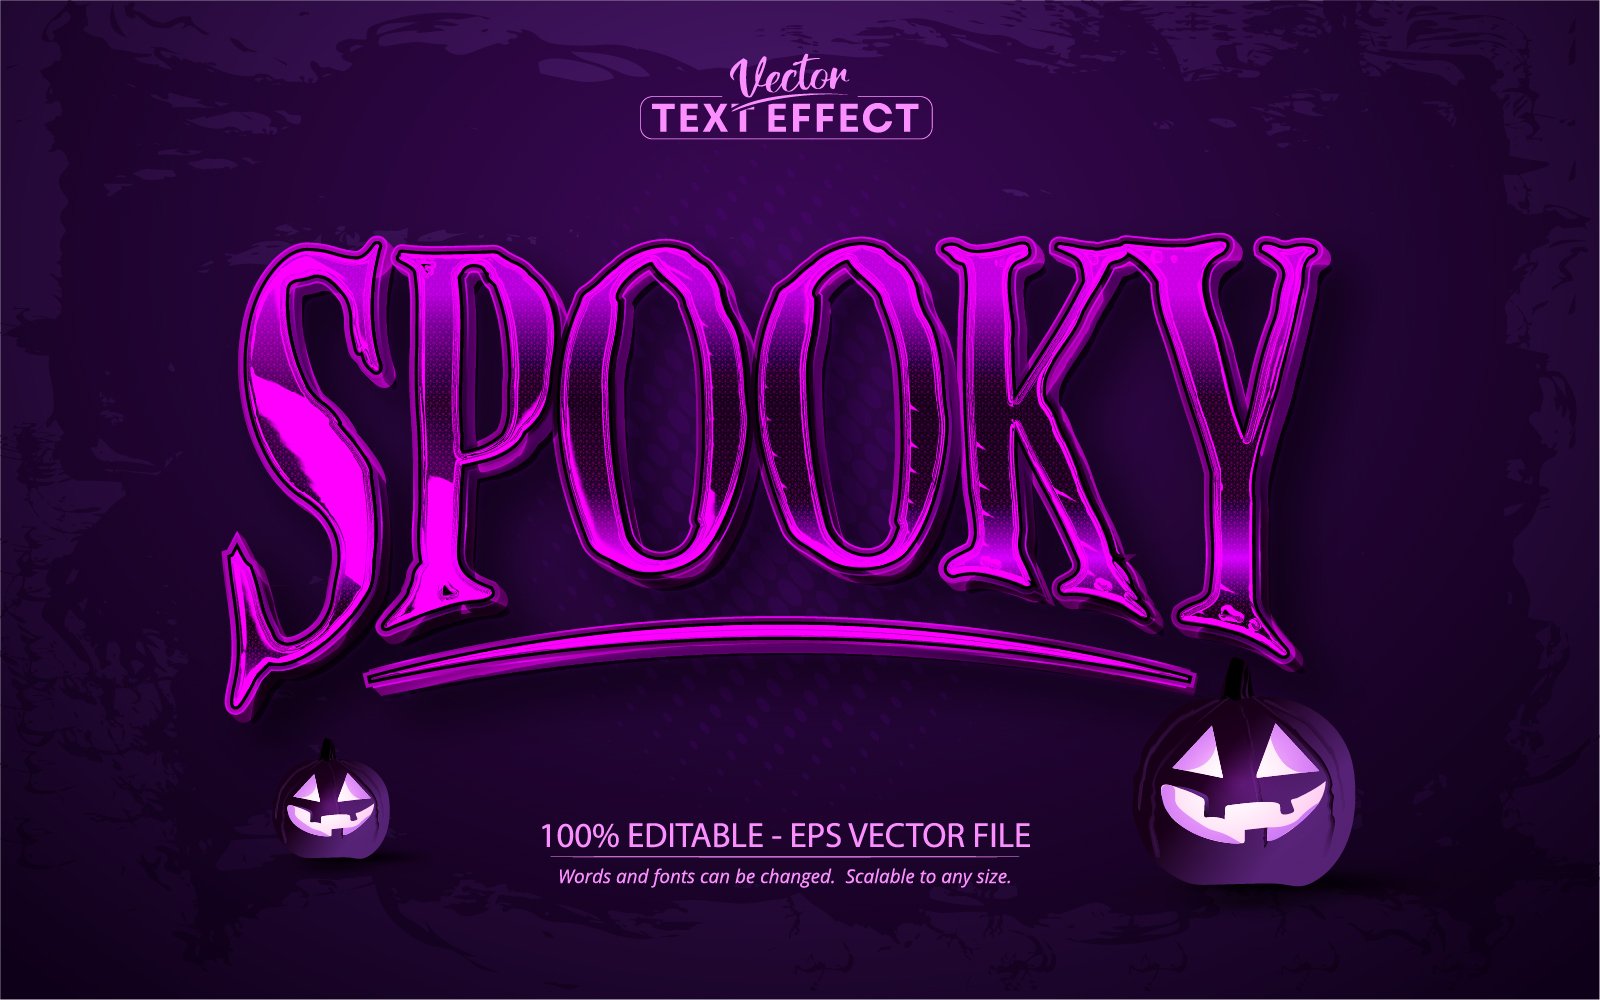 Spooky - Editable Text Effect, Halloween And Cartoon Text Style, Graphics Illustration